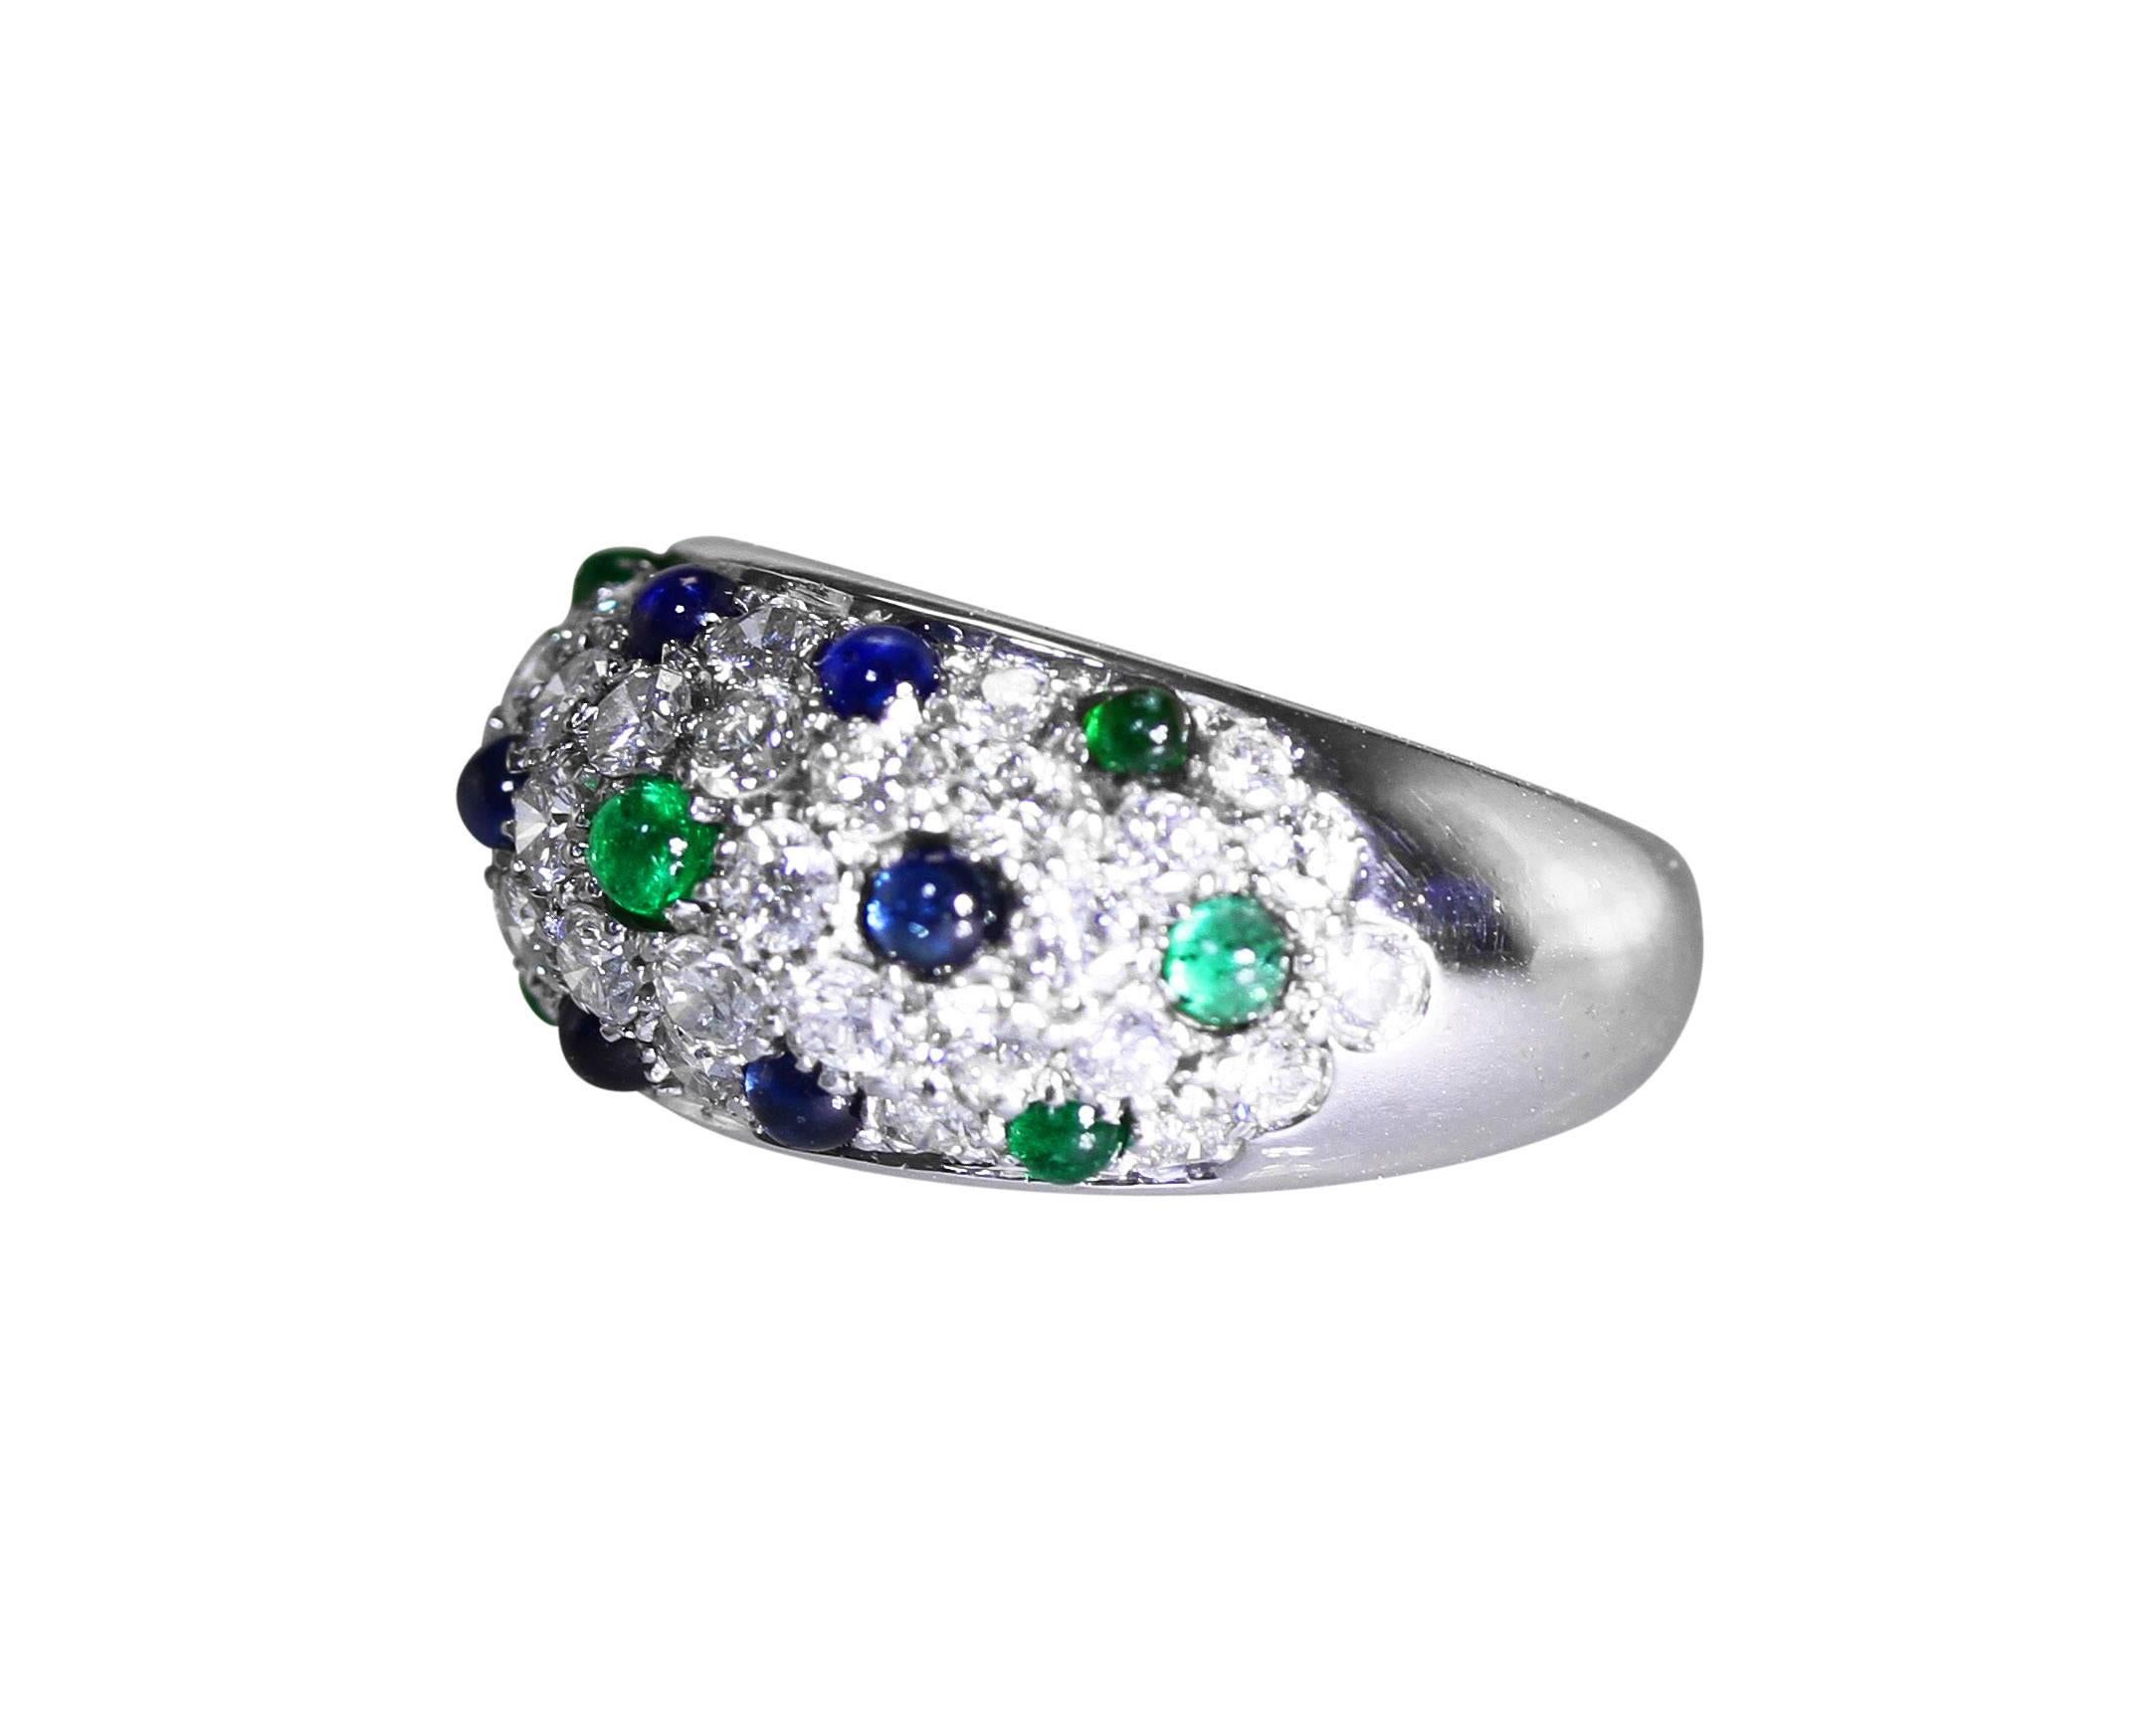 An 18 karat white gold, emerald, sapphire and diamond ring by Cartier, of slightly tapered design pave-set with 36 round diamonds weighing approximately 1.75 carats, accented by 7 cabochon emeralds weighing approximately 0.50 carat, and 6 cabochon